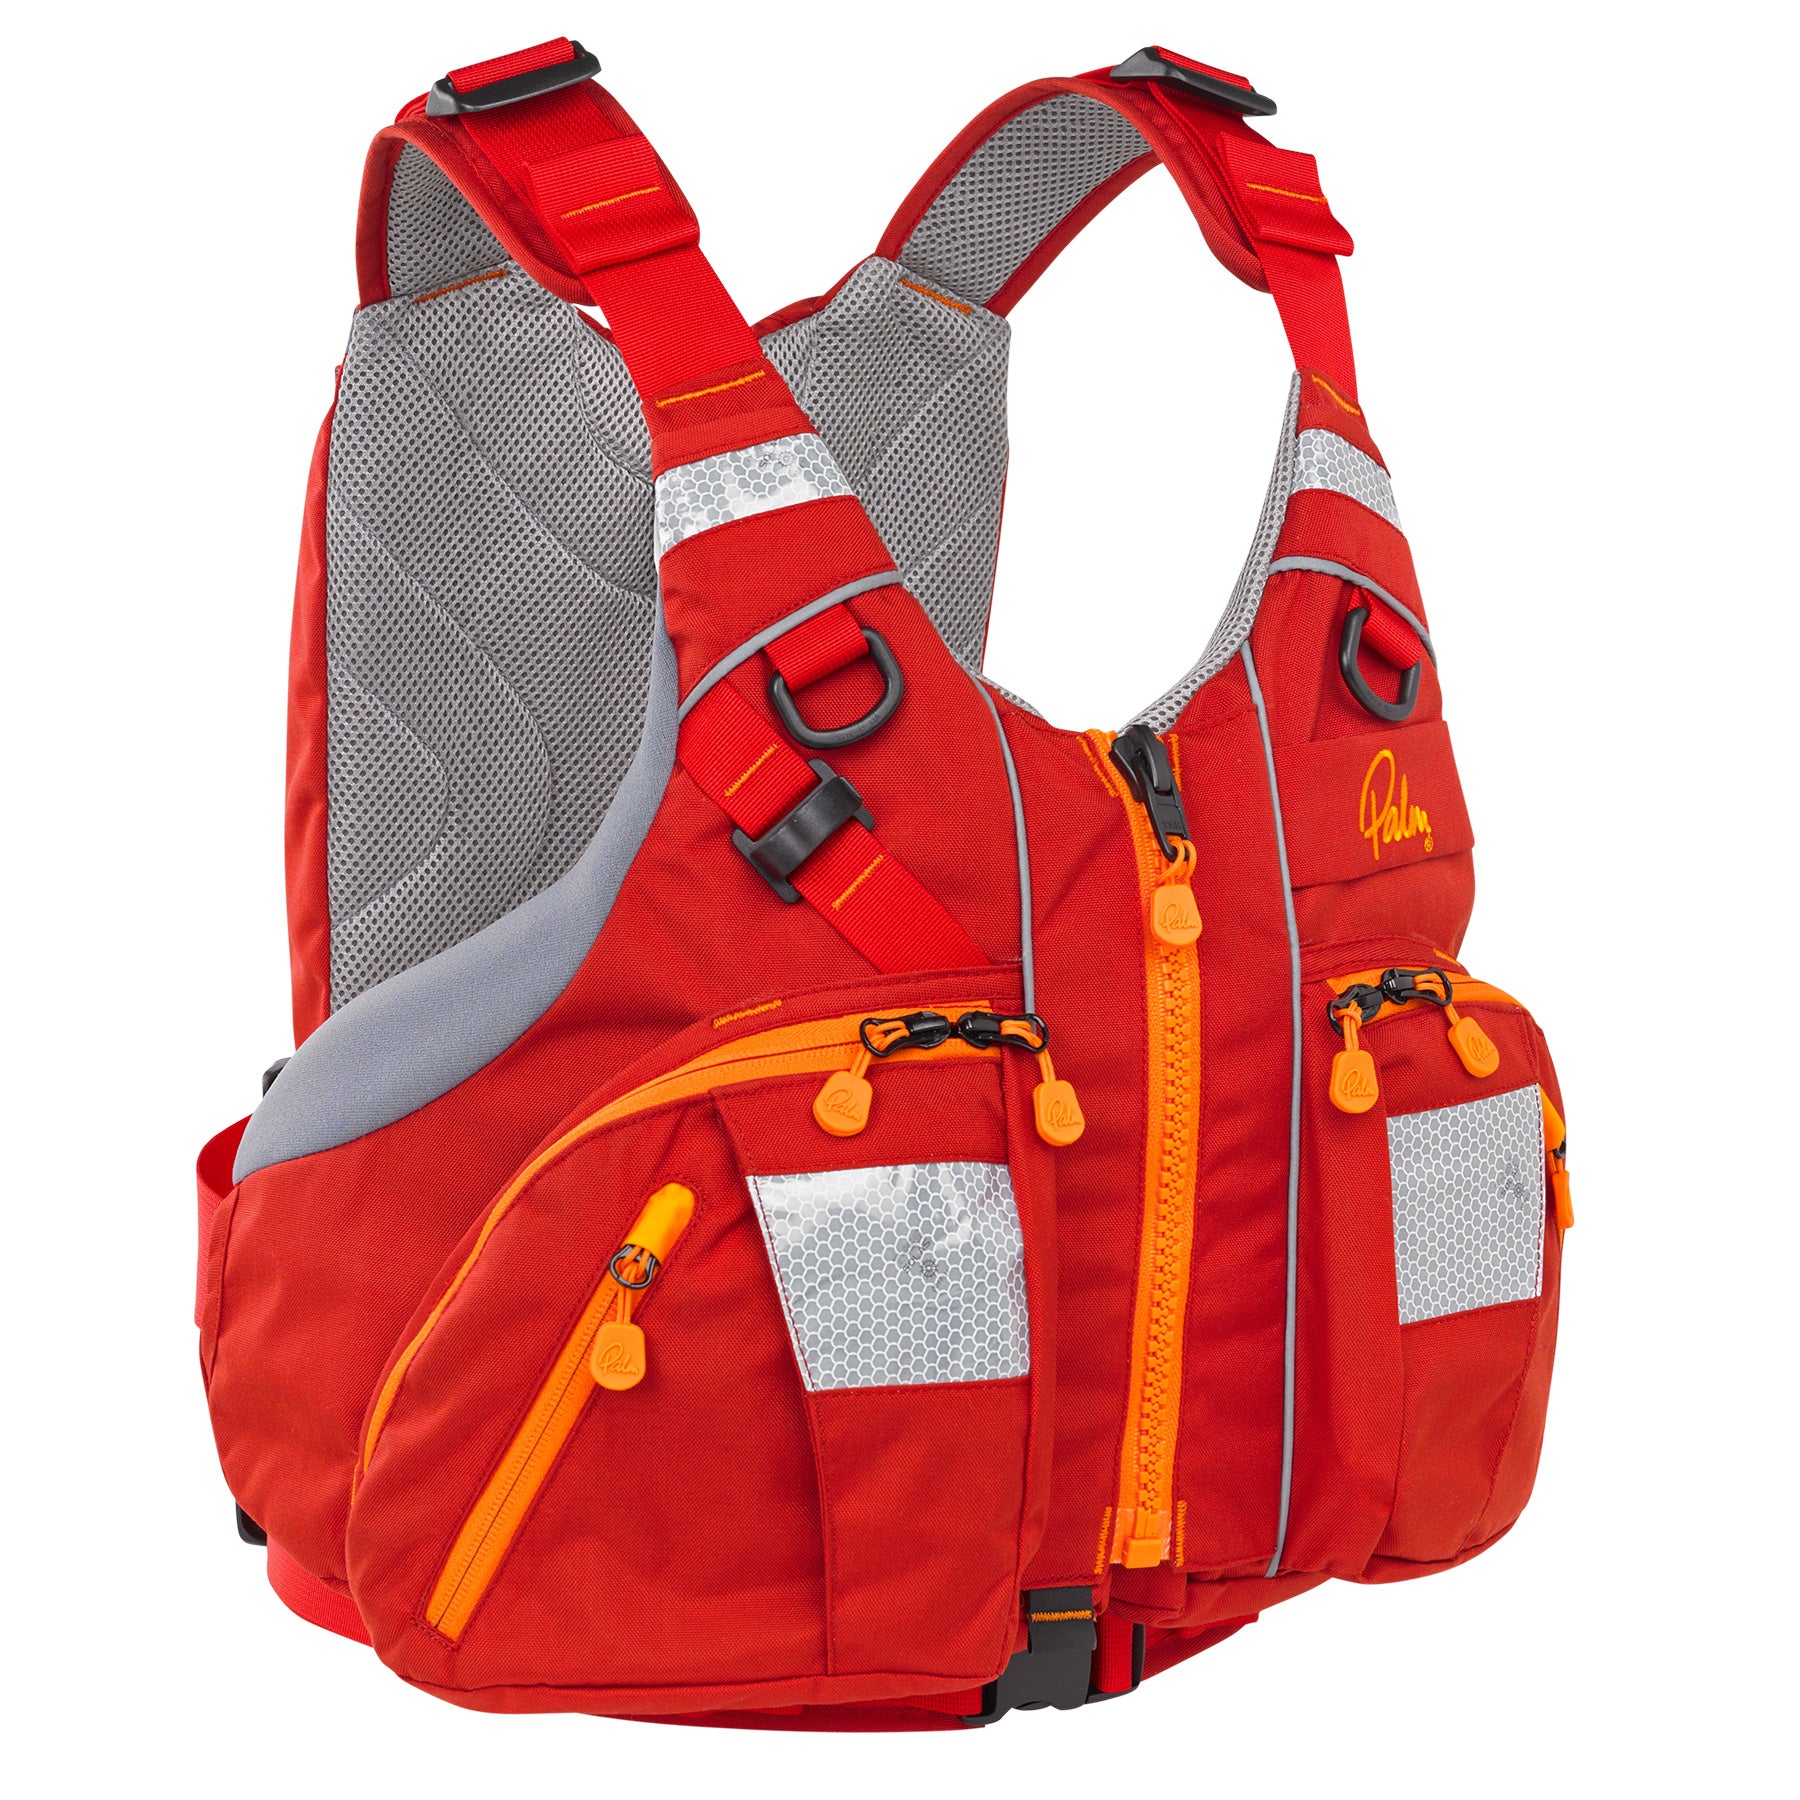 Palm Kaikoura buoyancy aid shown in red